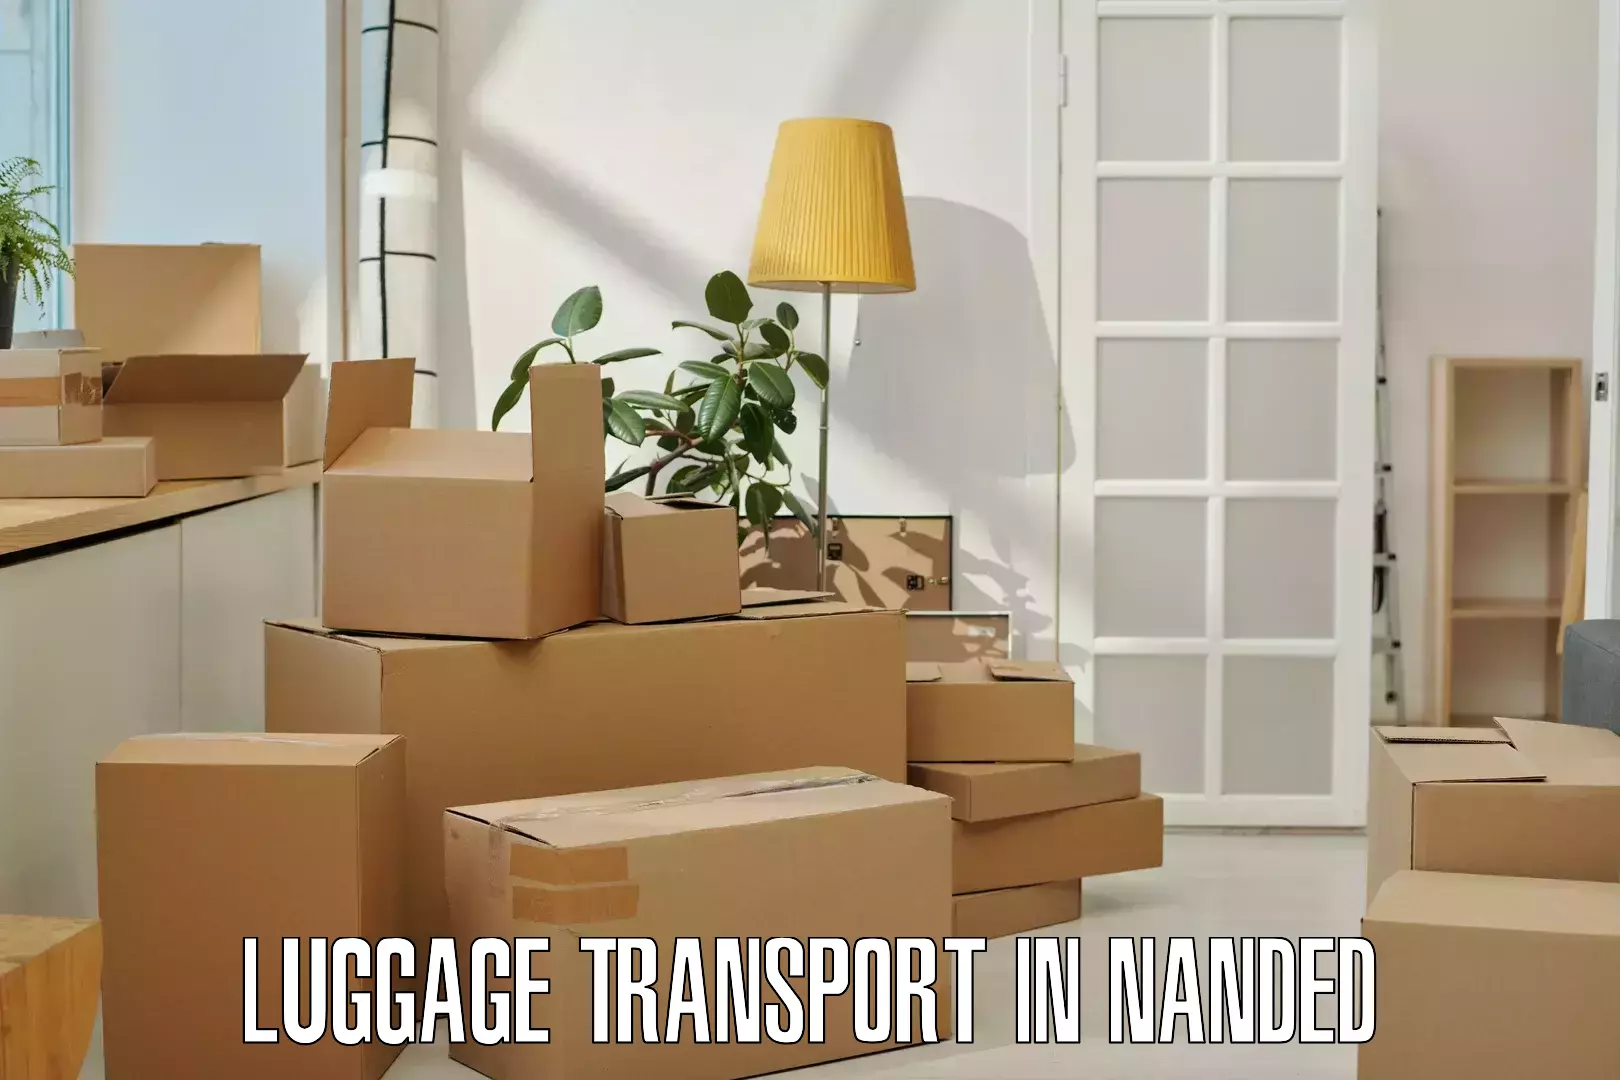 Premium luggage delivery in Nanded